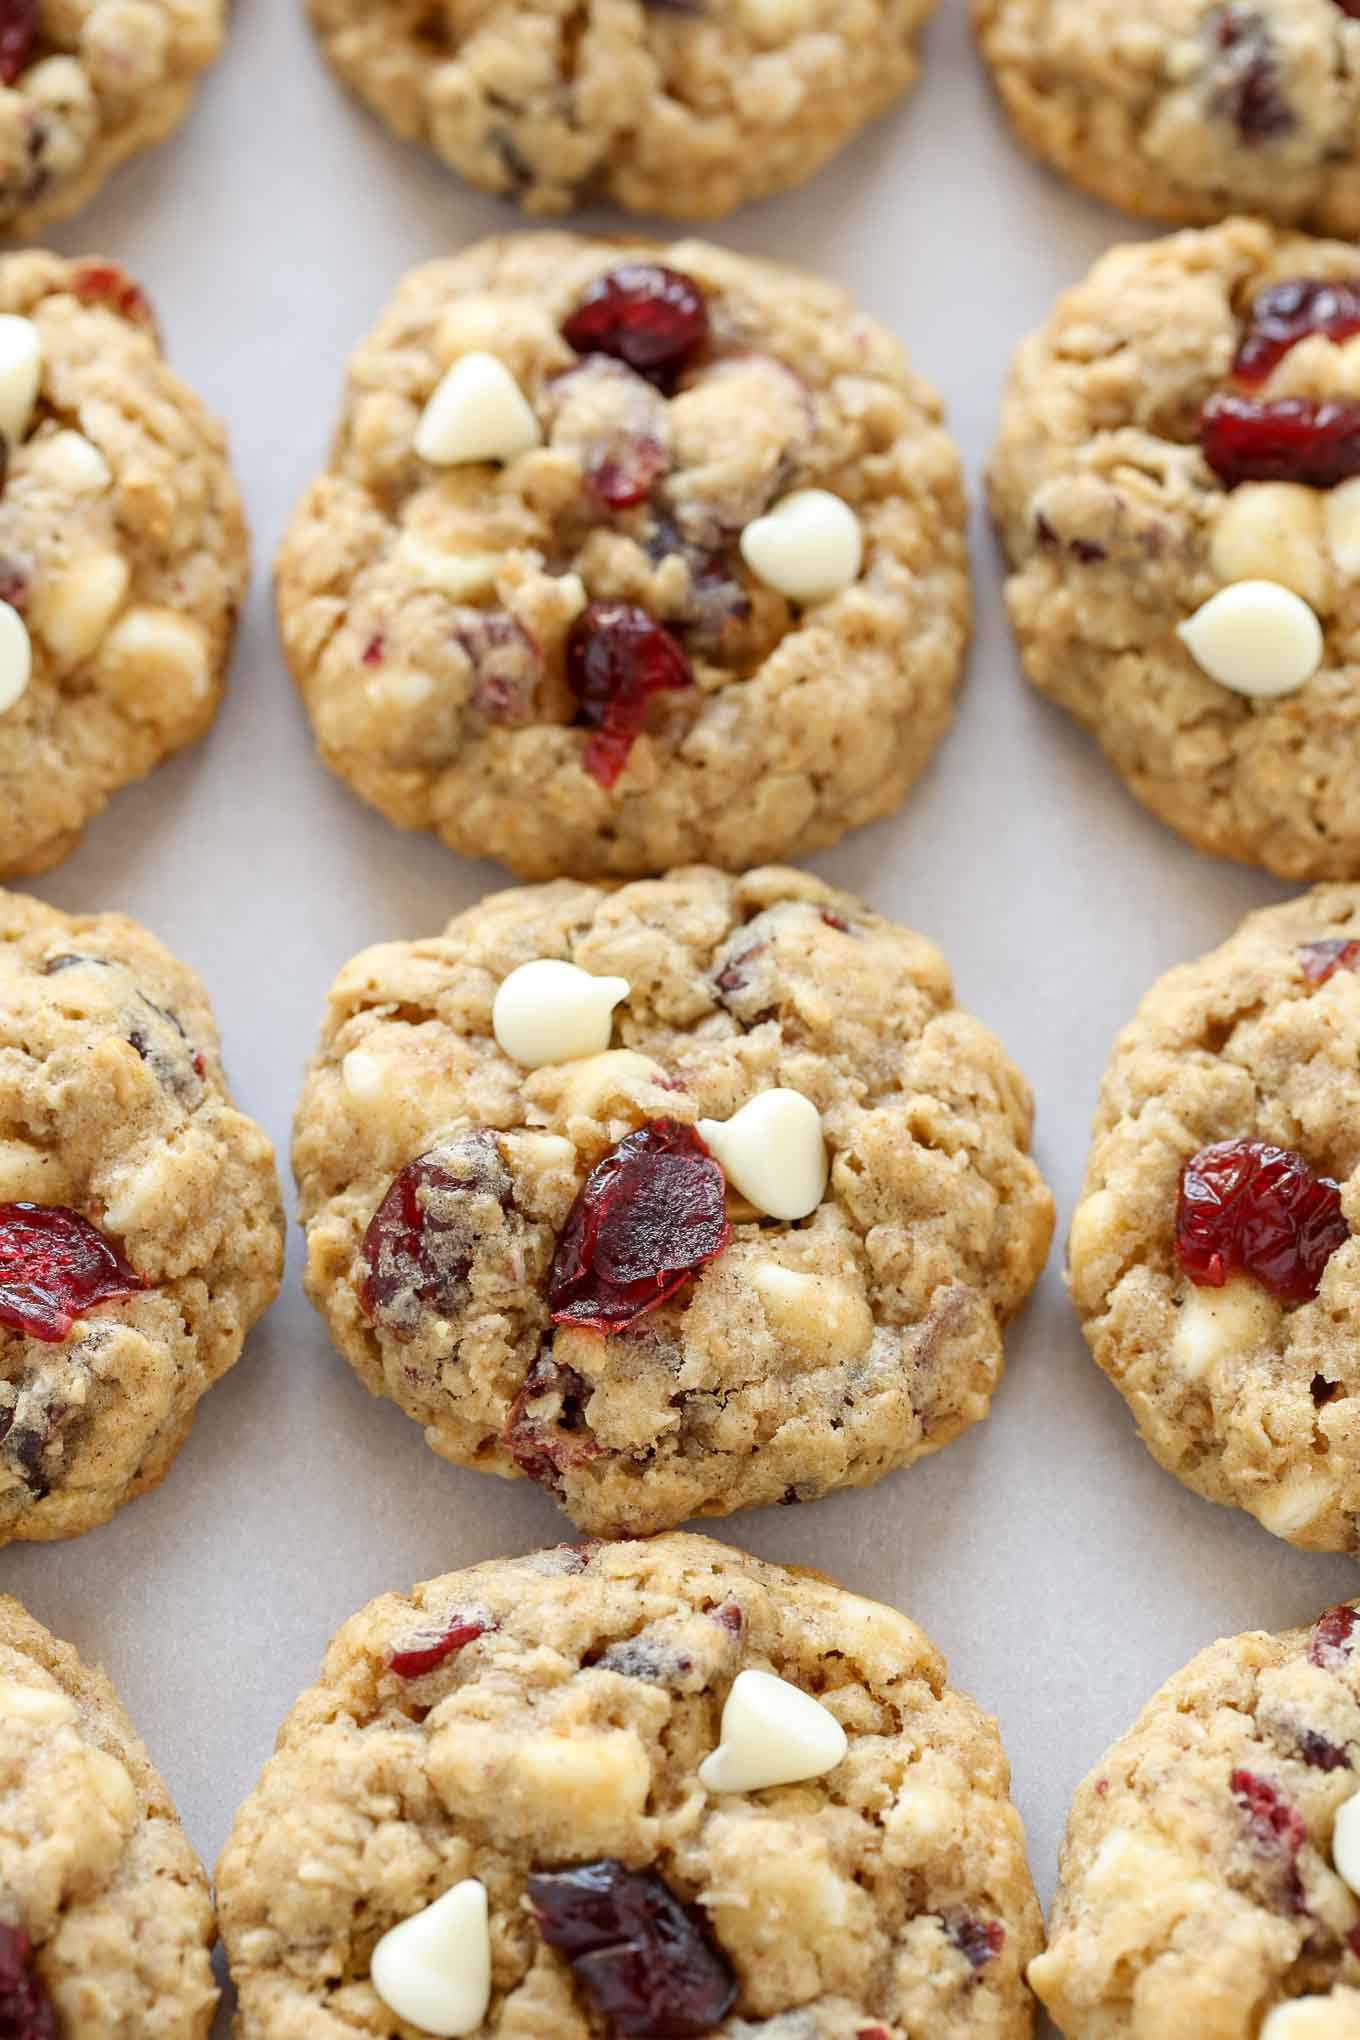 Cranberry White Chocolate Chip Oatmeal Cookies Awesome soft and Chewy White Chocolate Cranberry Oatmeal Cookies